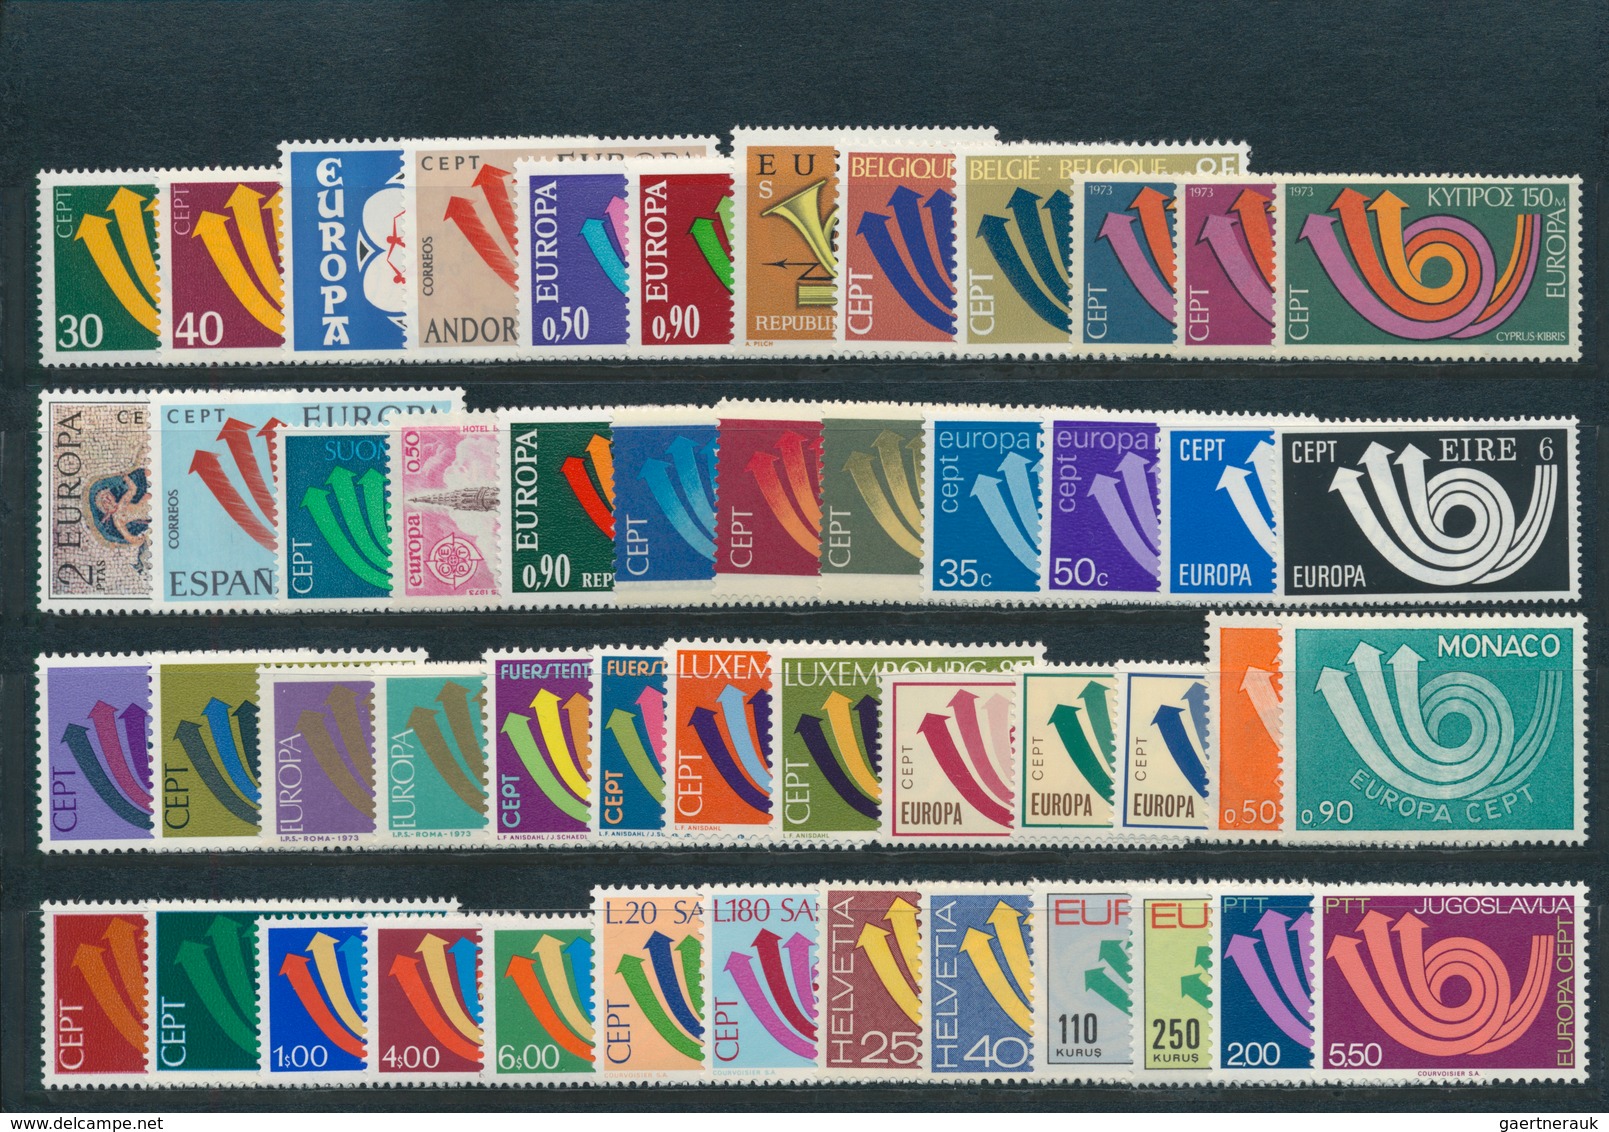 28838 Europa-Union (CEPT): Mint never hinged collection of the joint issues; complete in the main numbers;